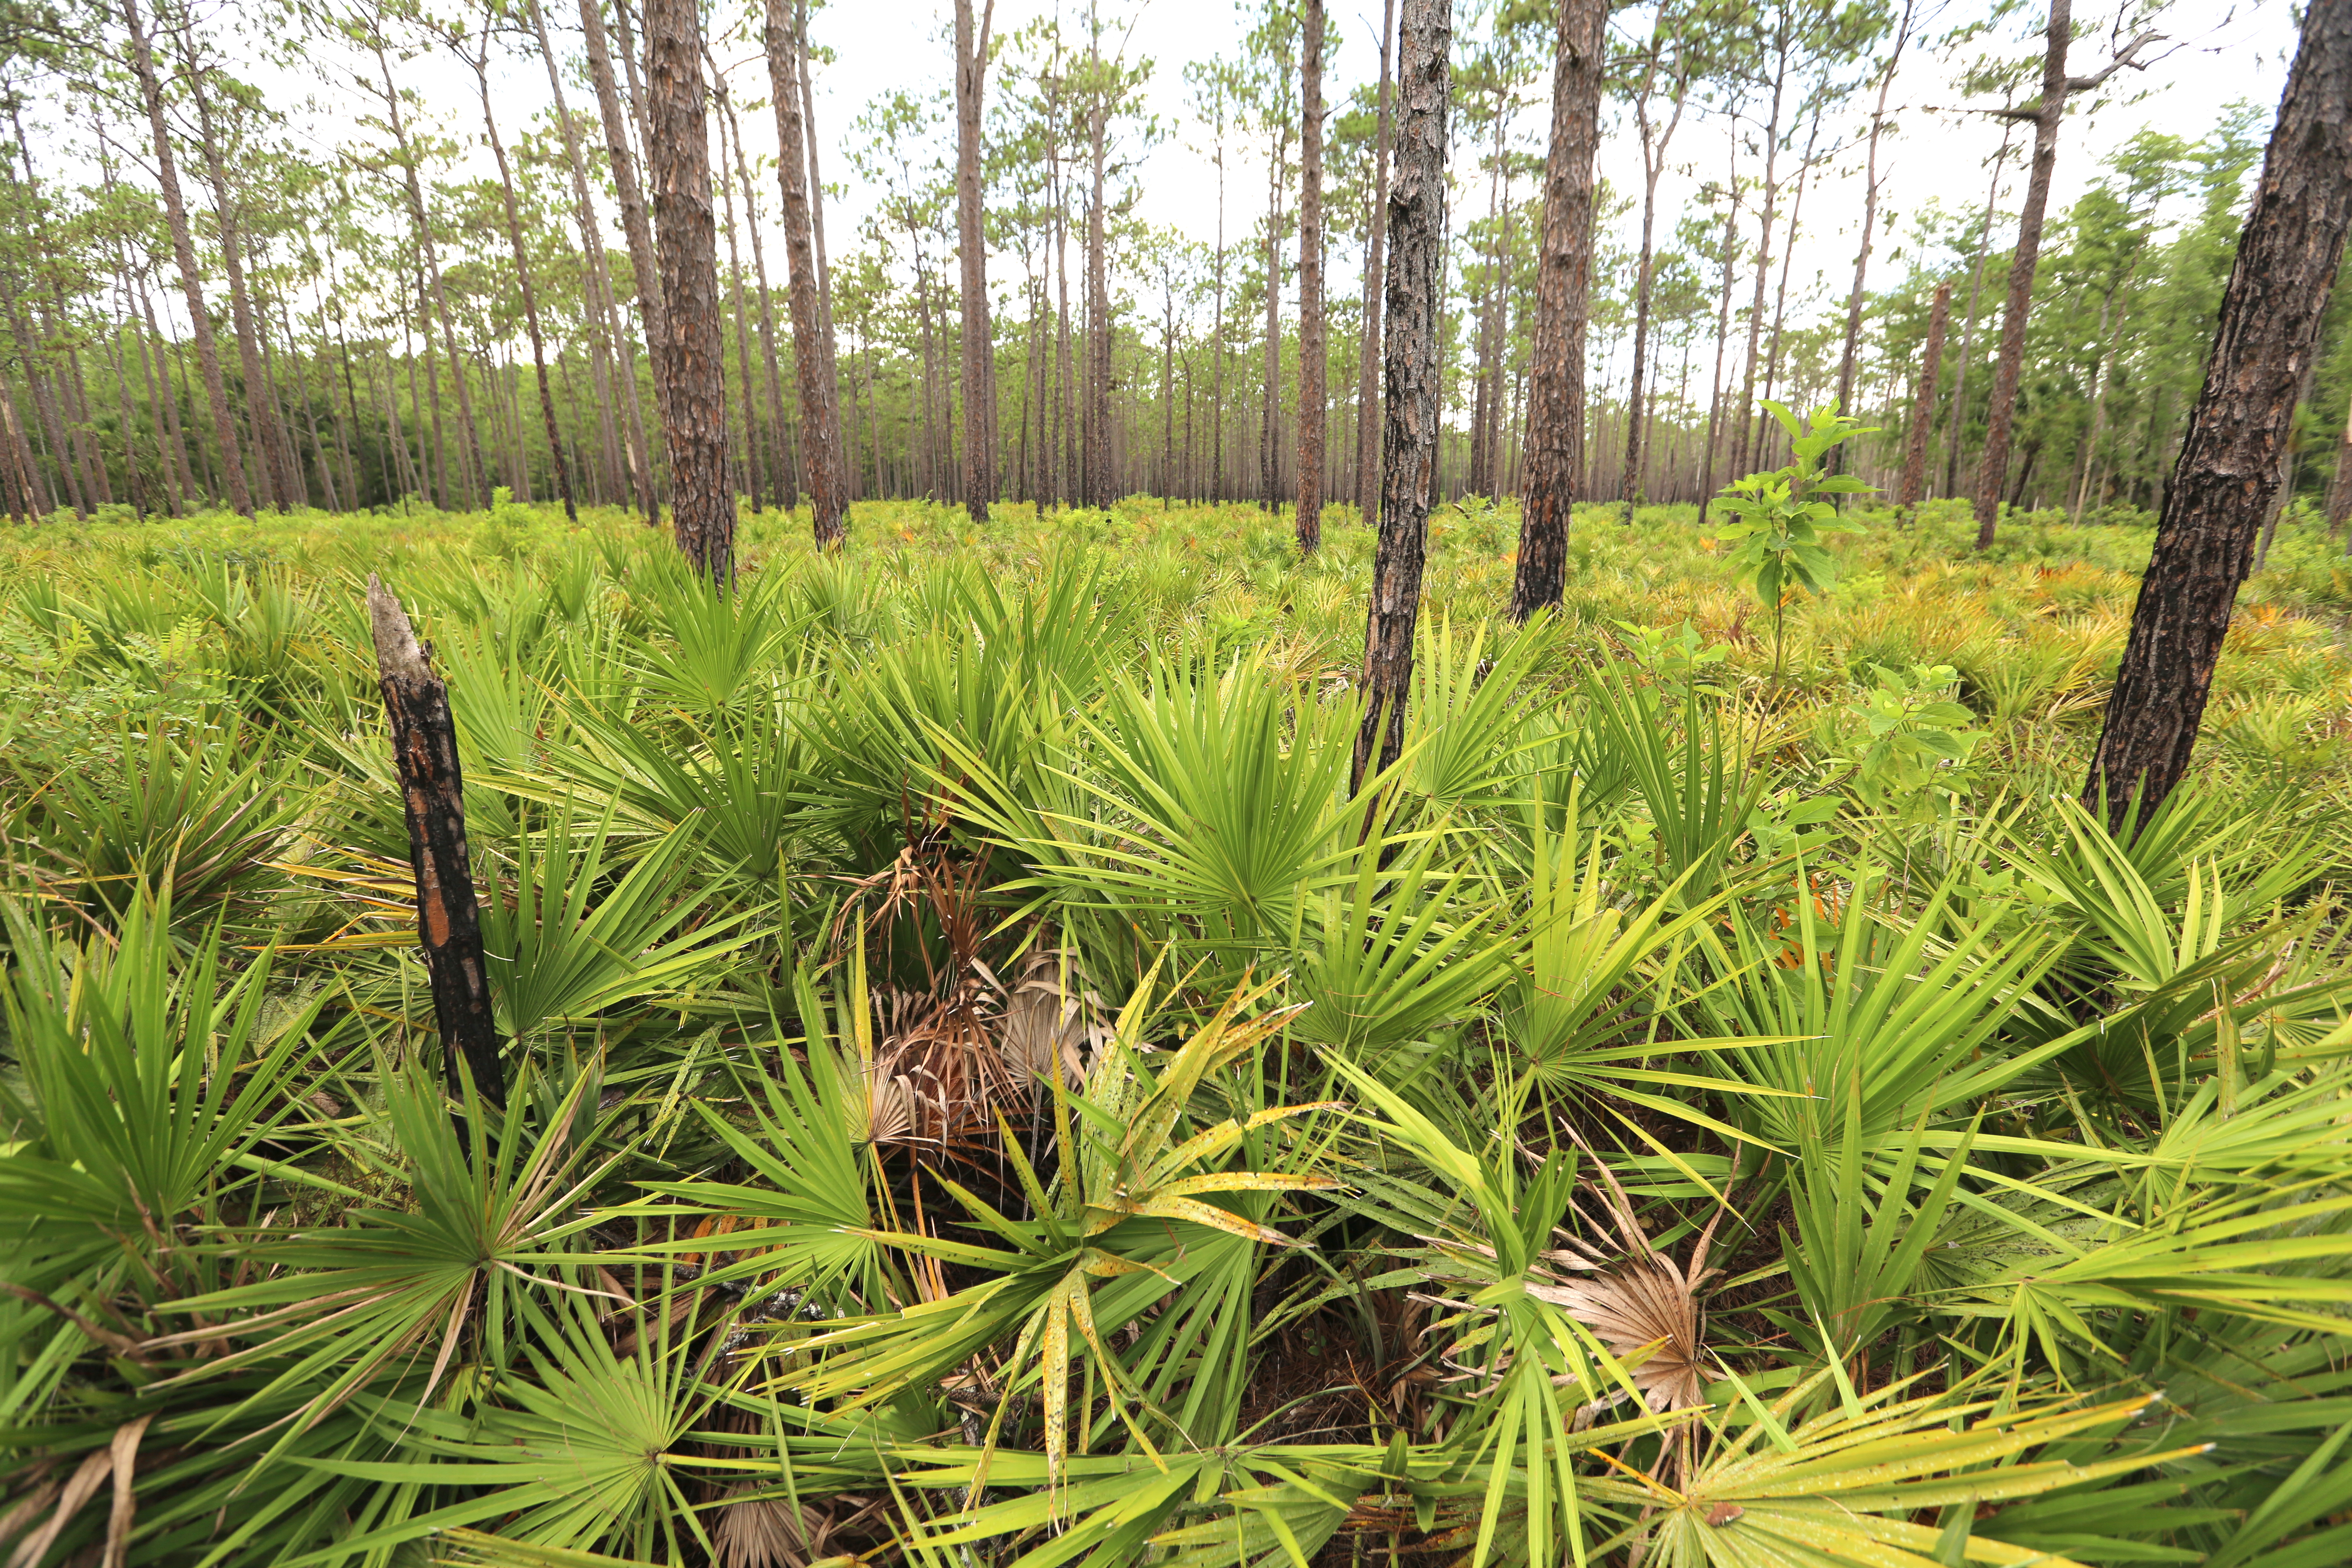 Saw palmetto in Colt Creek mesic flatwoods